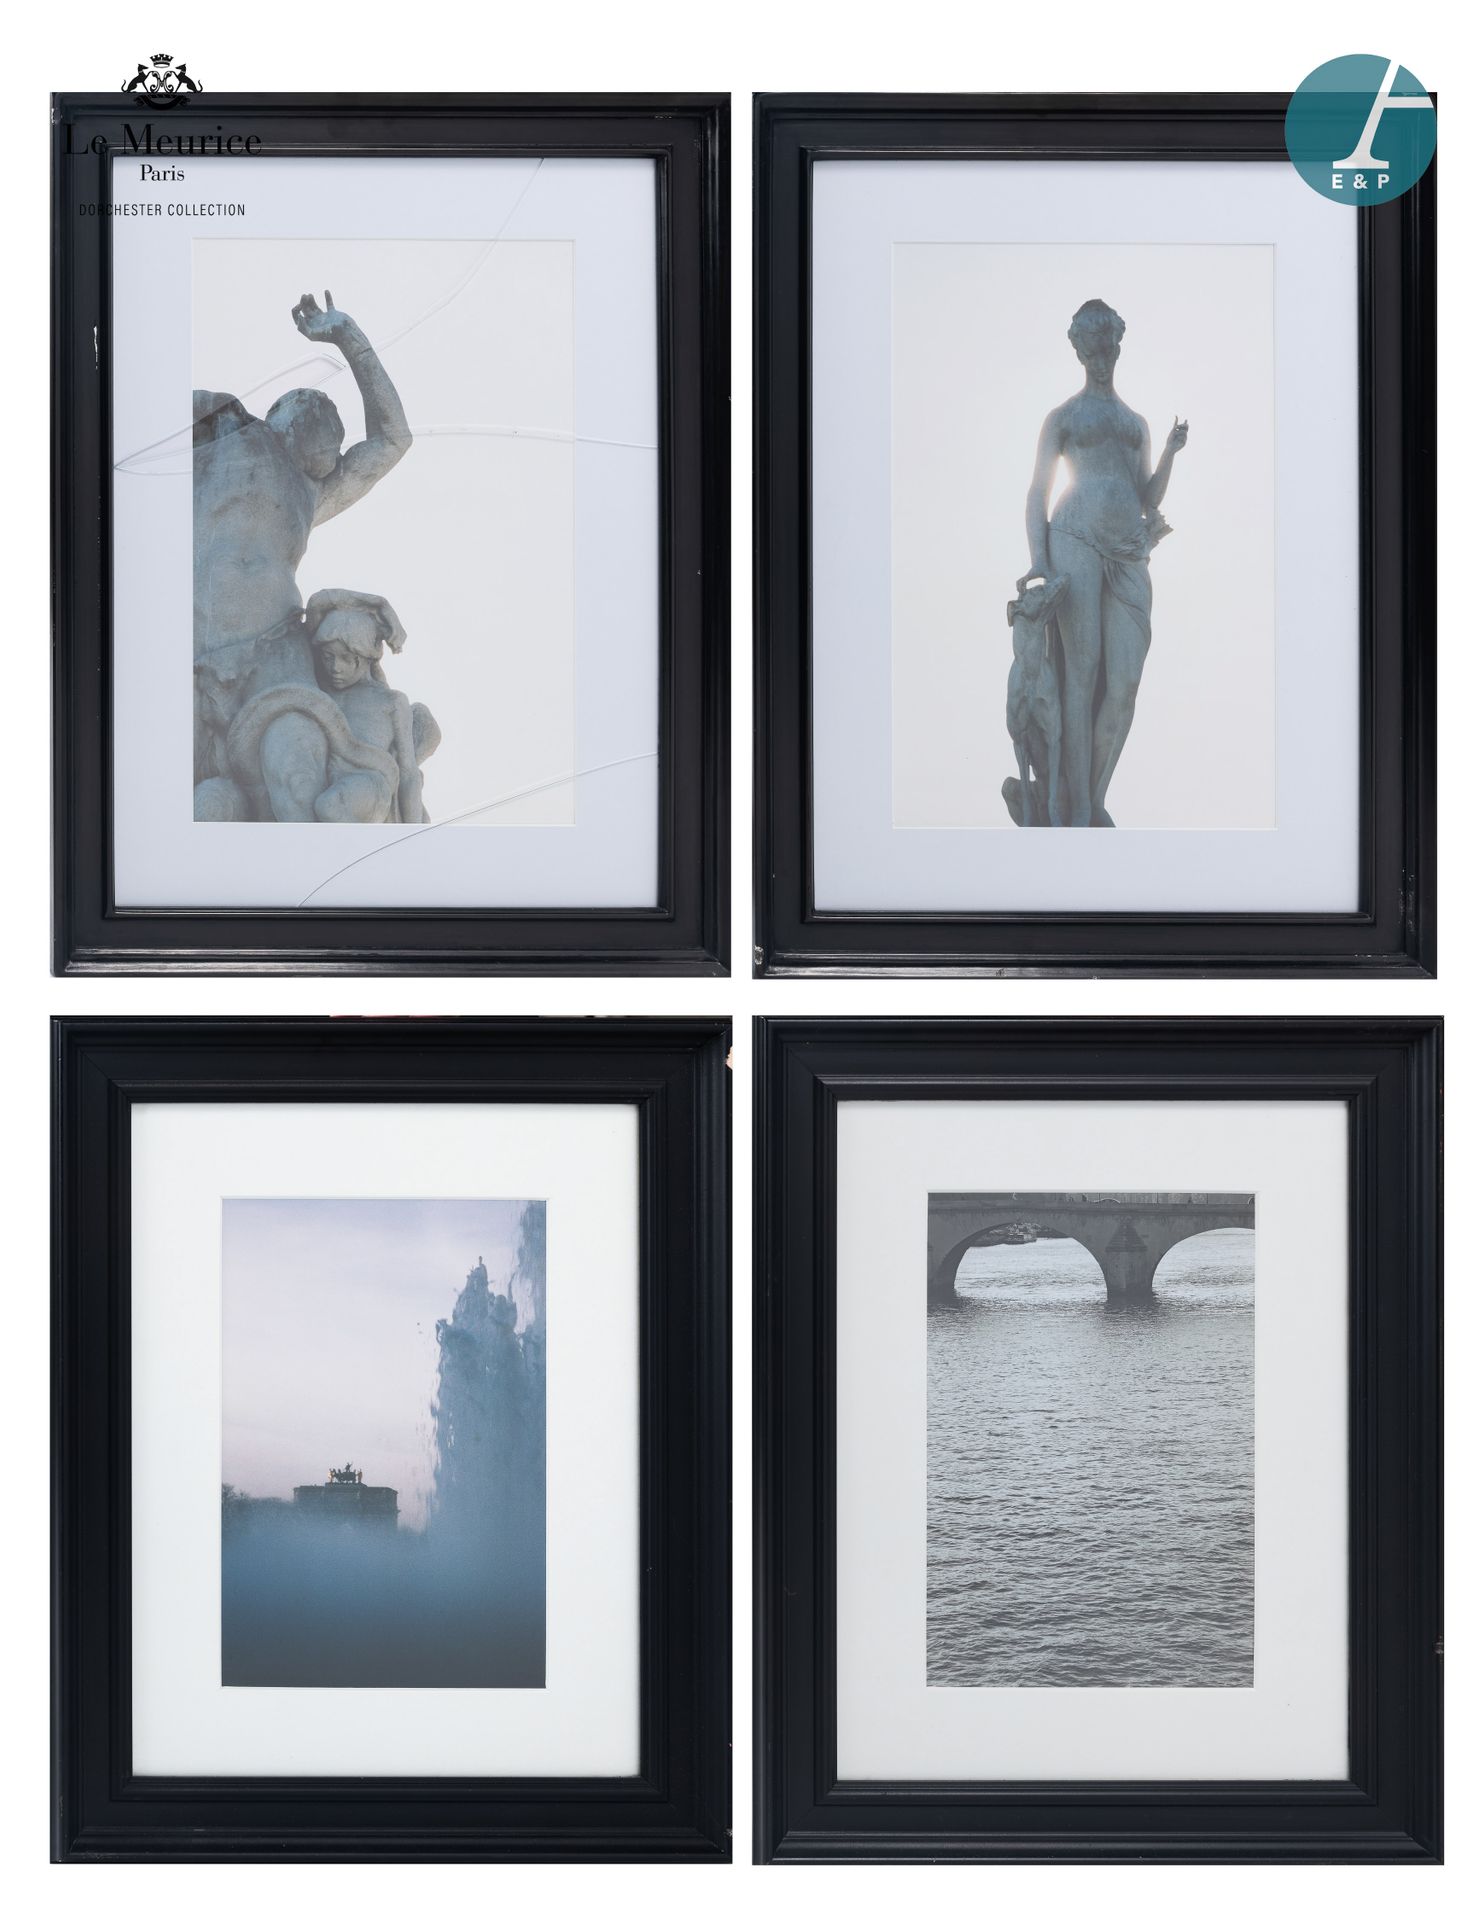 Null From Hôtel Le Meurice.
Set of four framed photos, featuring details of scul&hellip;